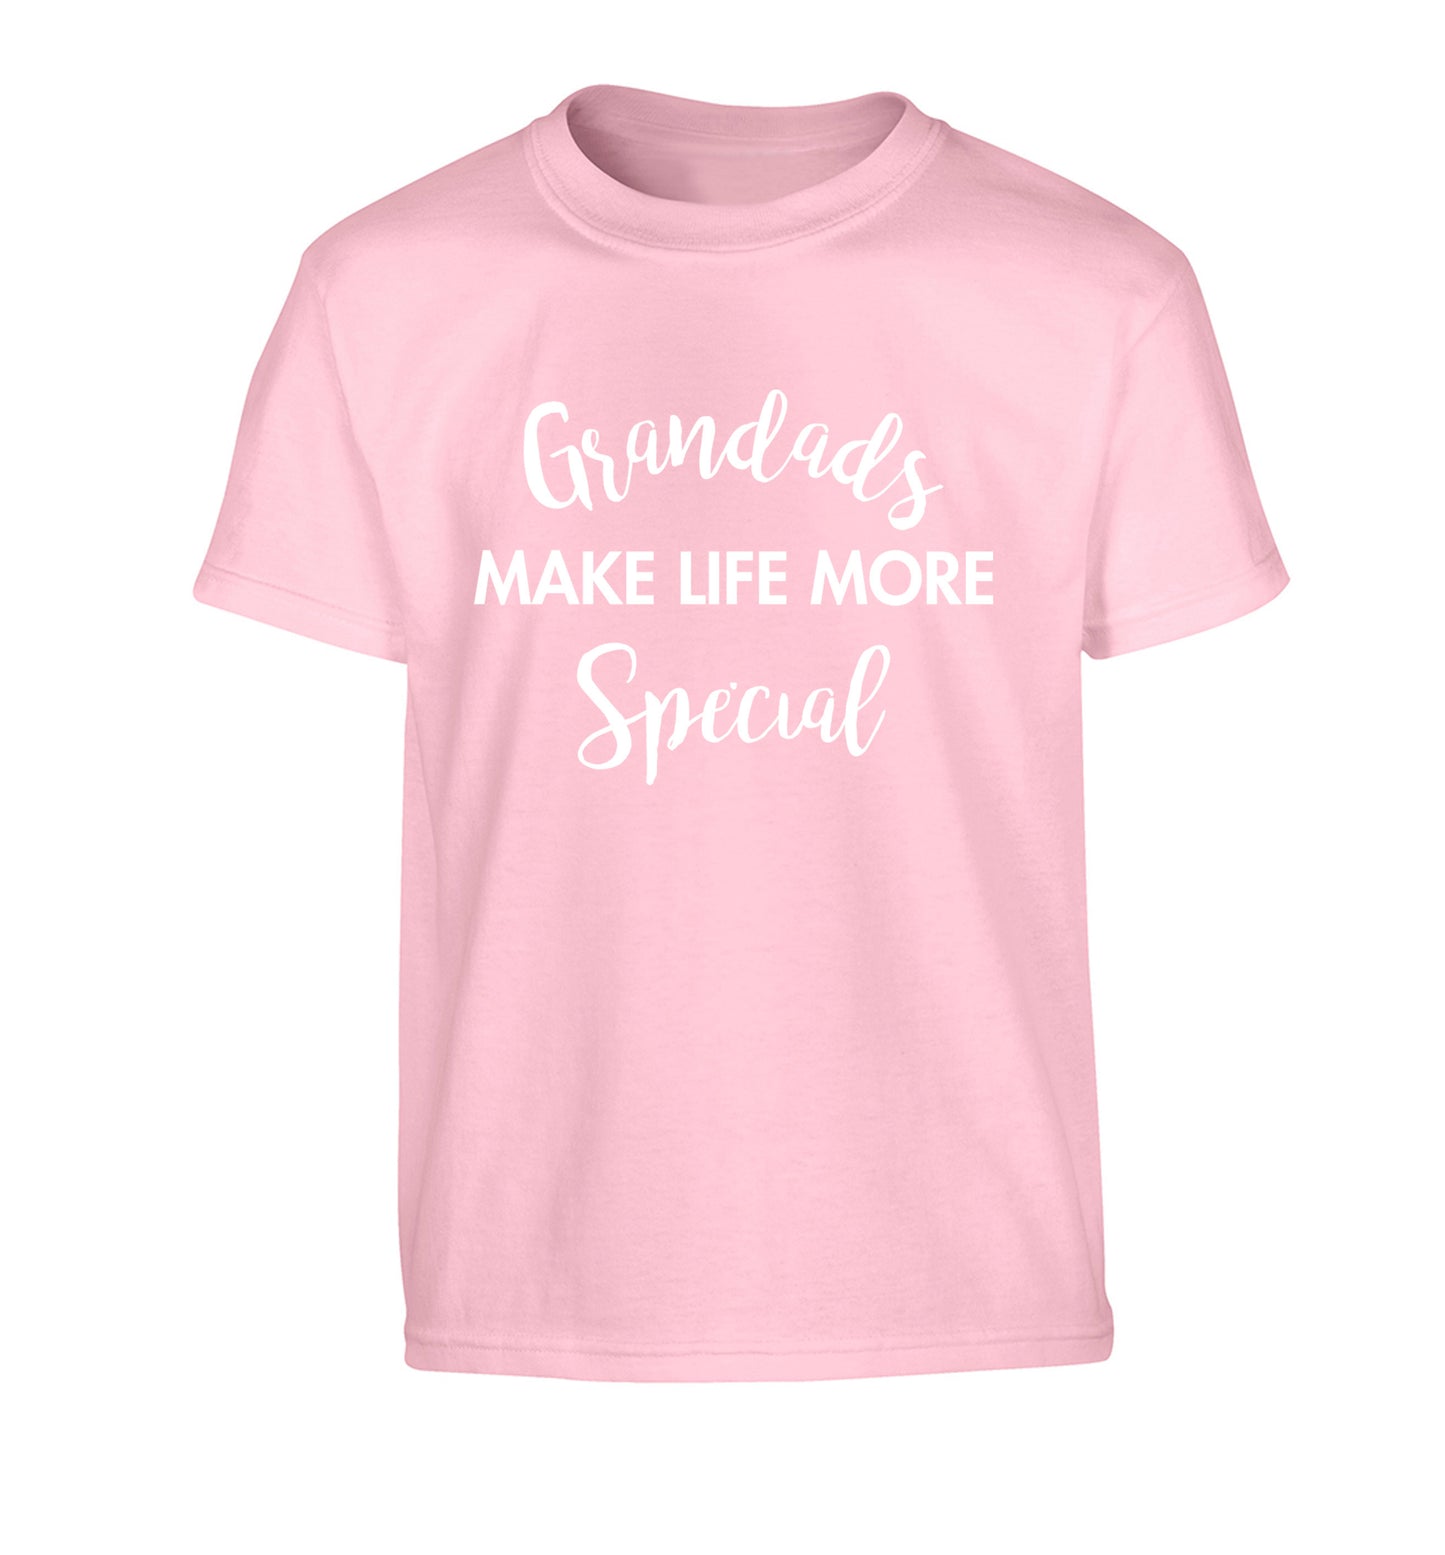 Grandads make life more special Children's light pink Tshirt 12-14 Years